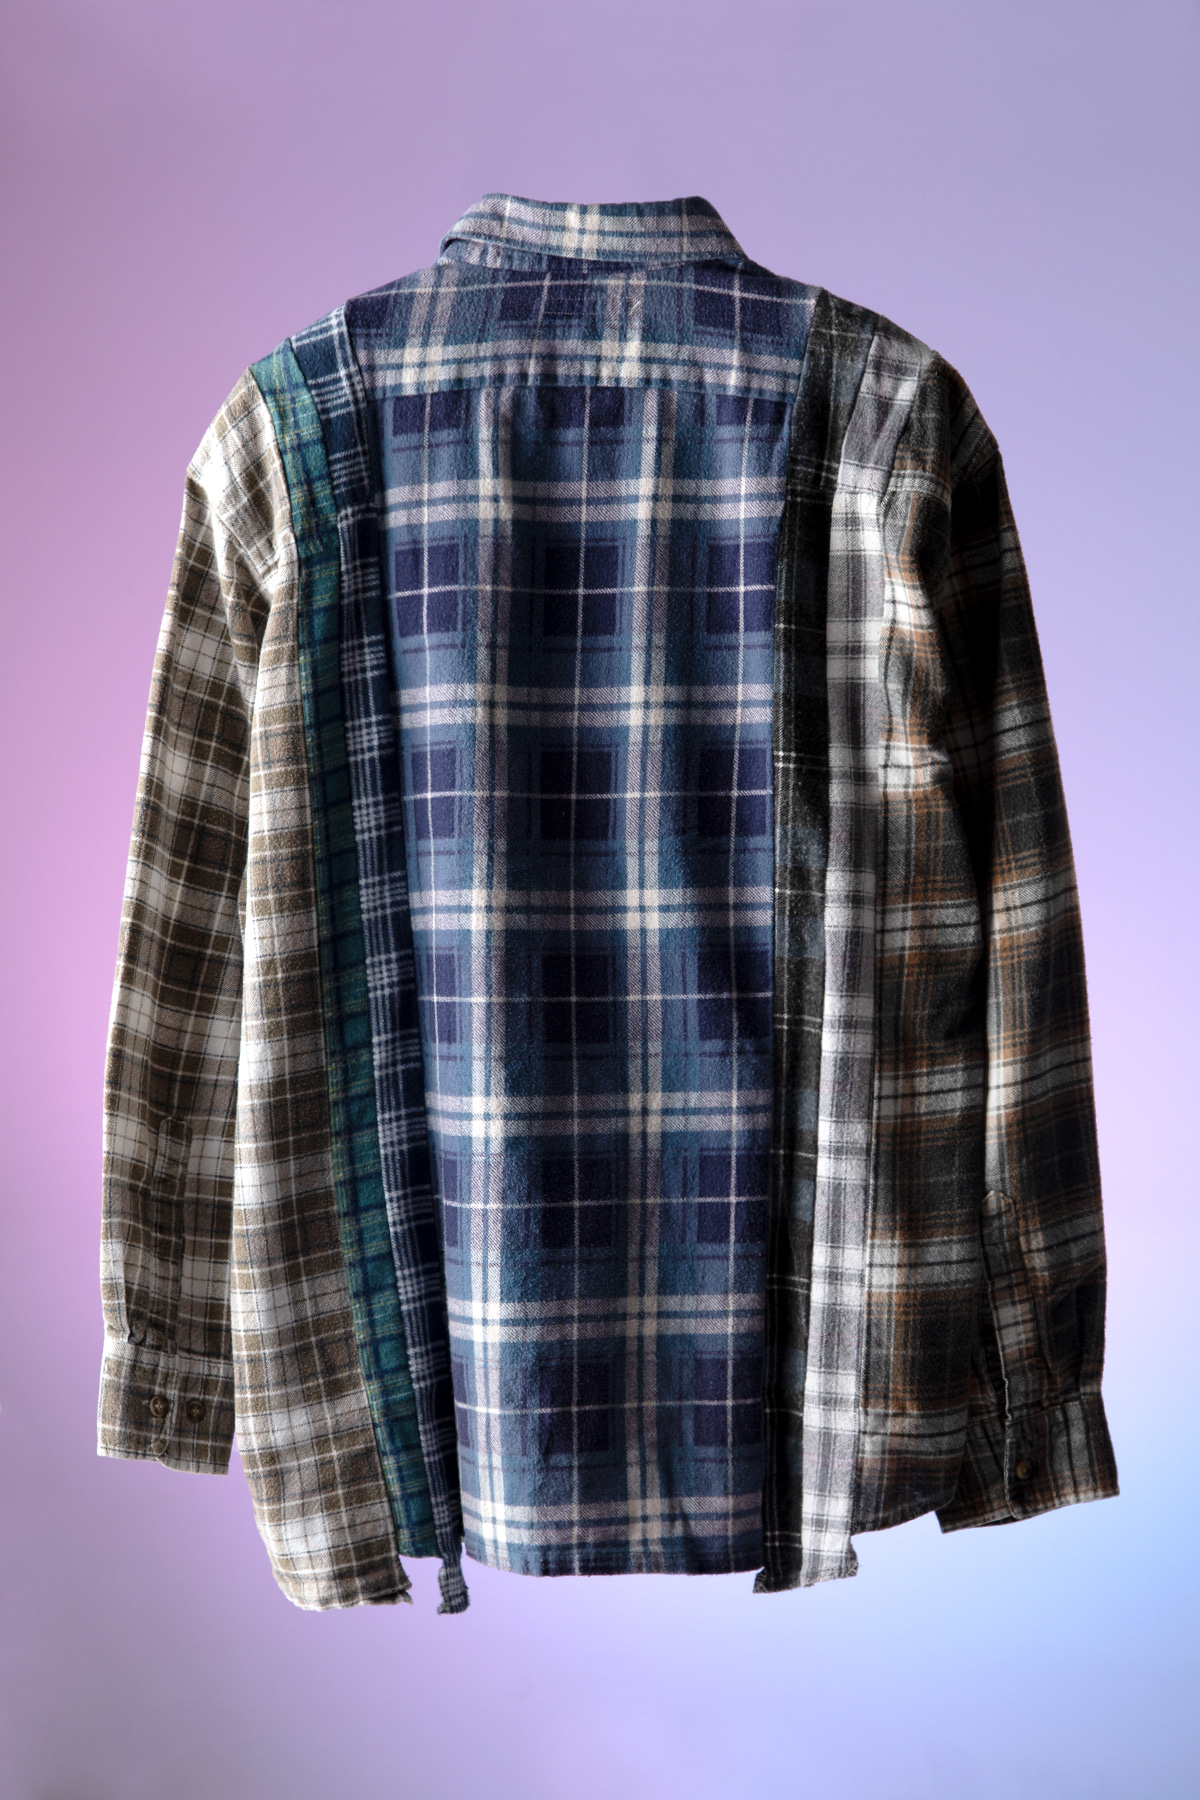 NEEDLES : REBUILD BY NEEDLES FLANNEL SHIRT 1-3 (ASSORTED)